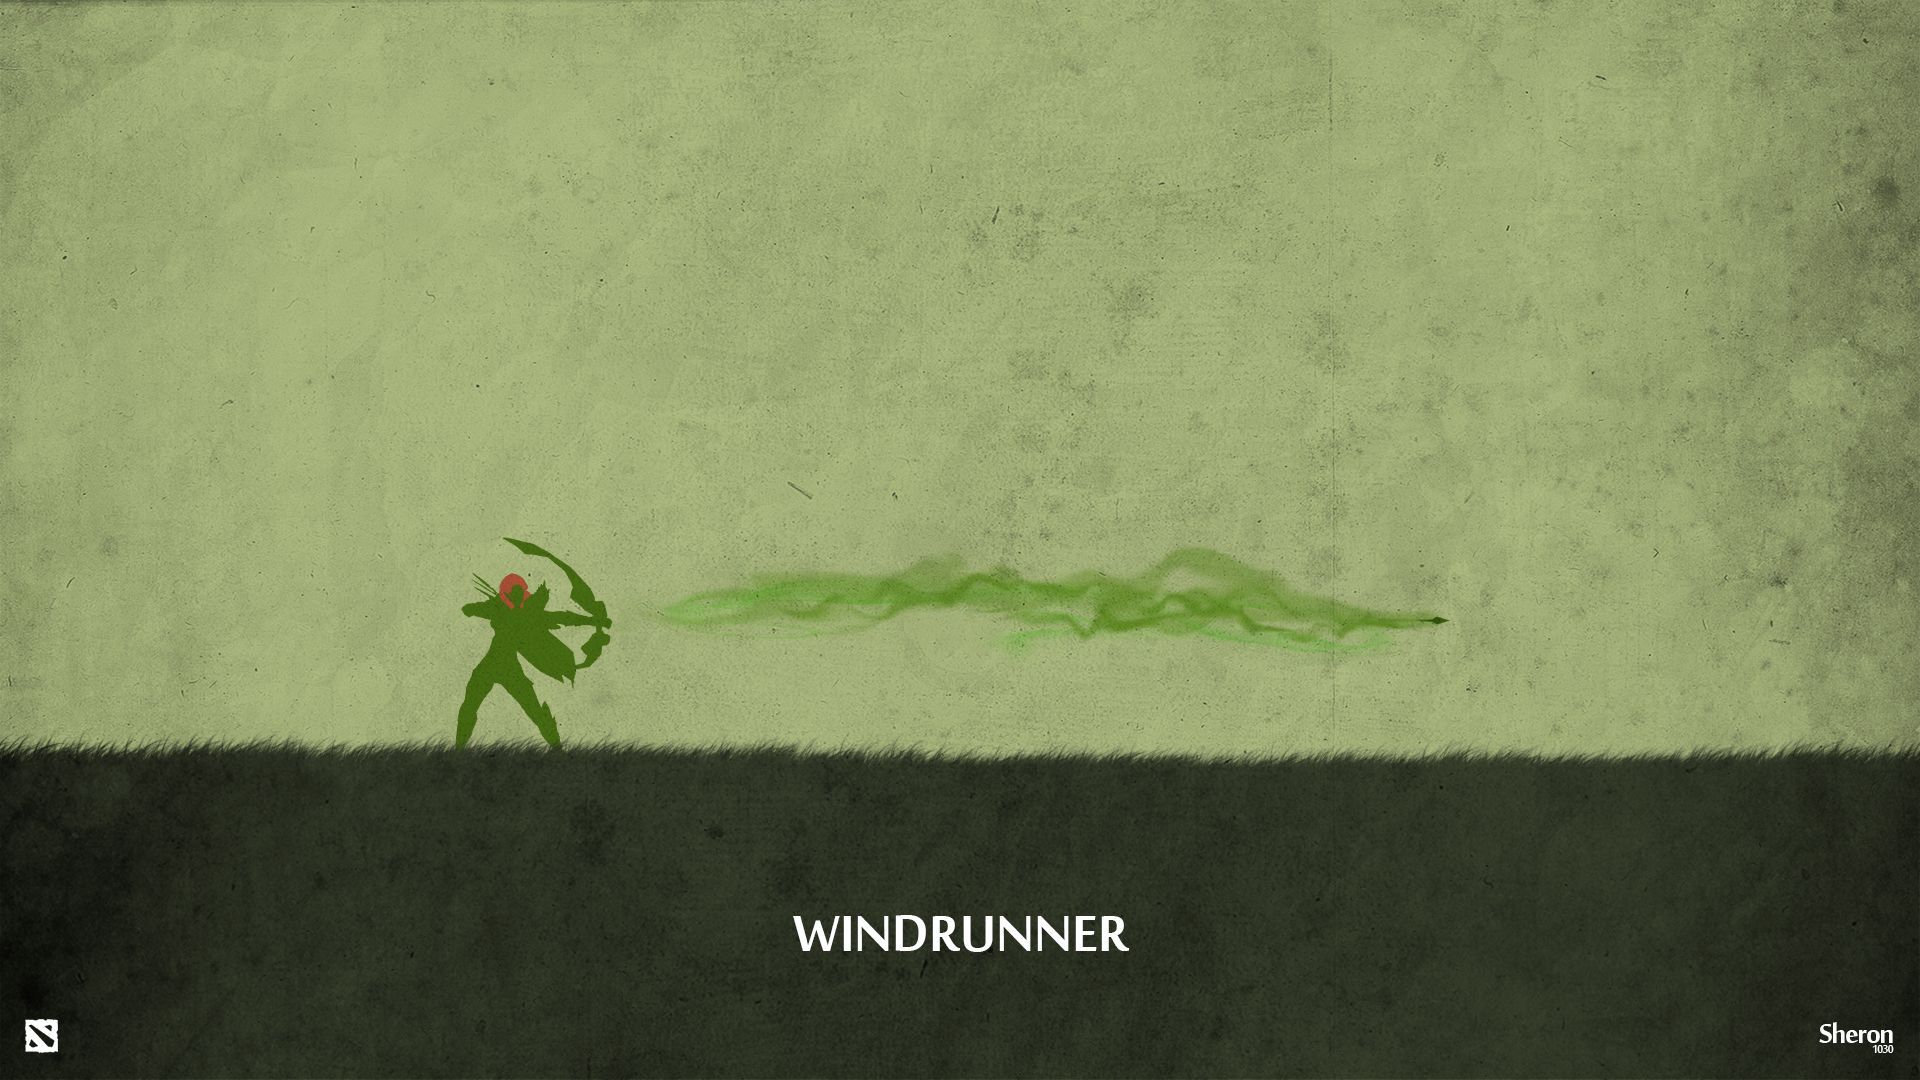 Sometimes the simple ones are awesome. Windrunner Wallpaper